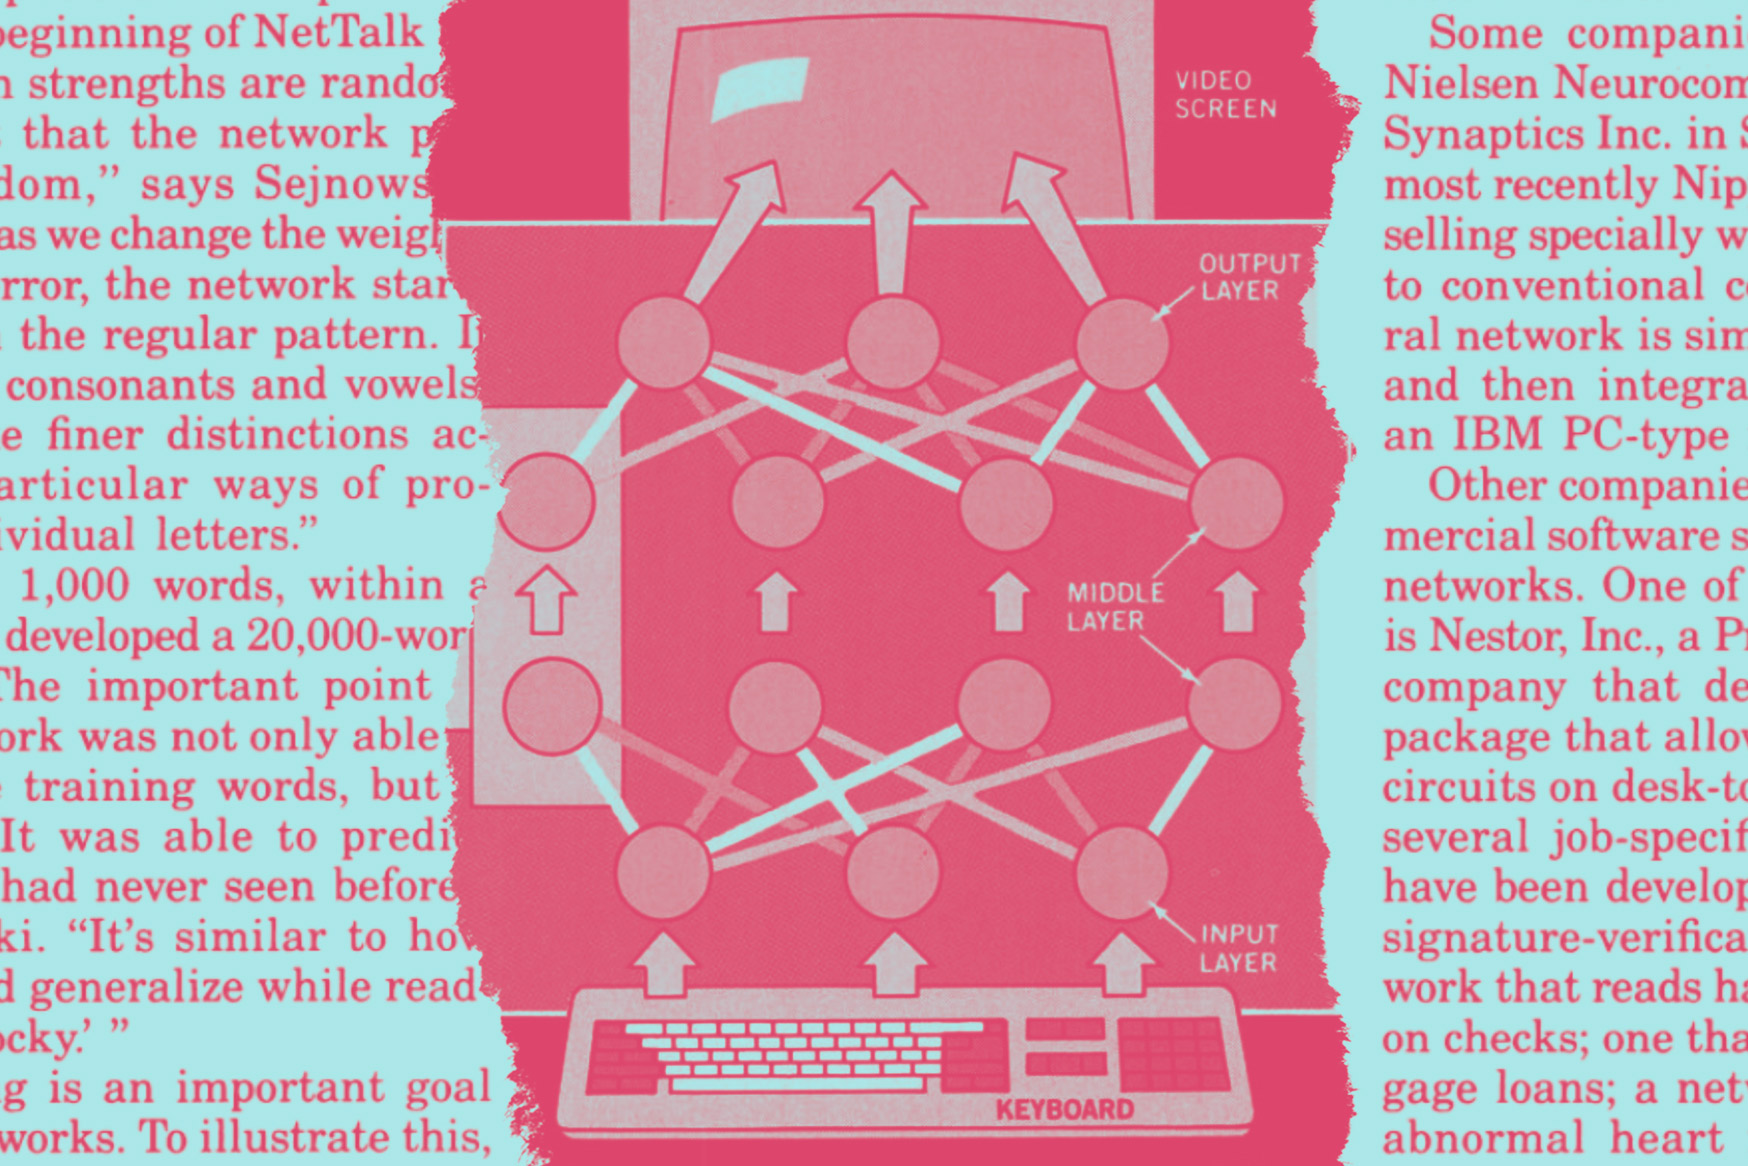 Images from the February 1989 issue of Popular Science from an article on "brain-style" computers.